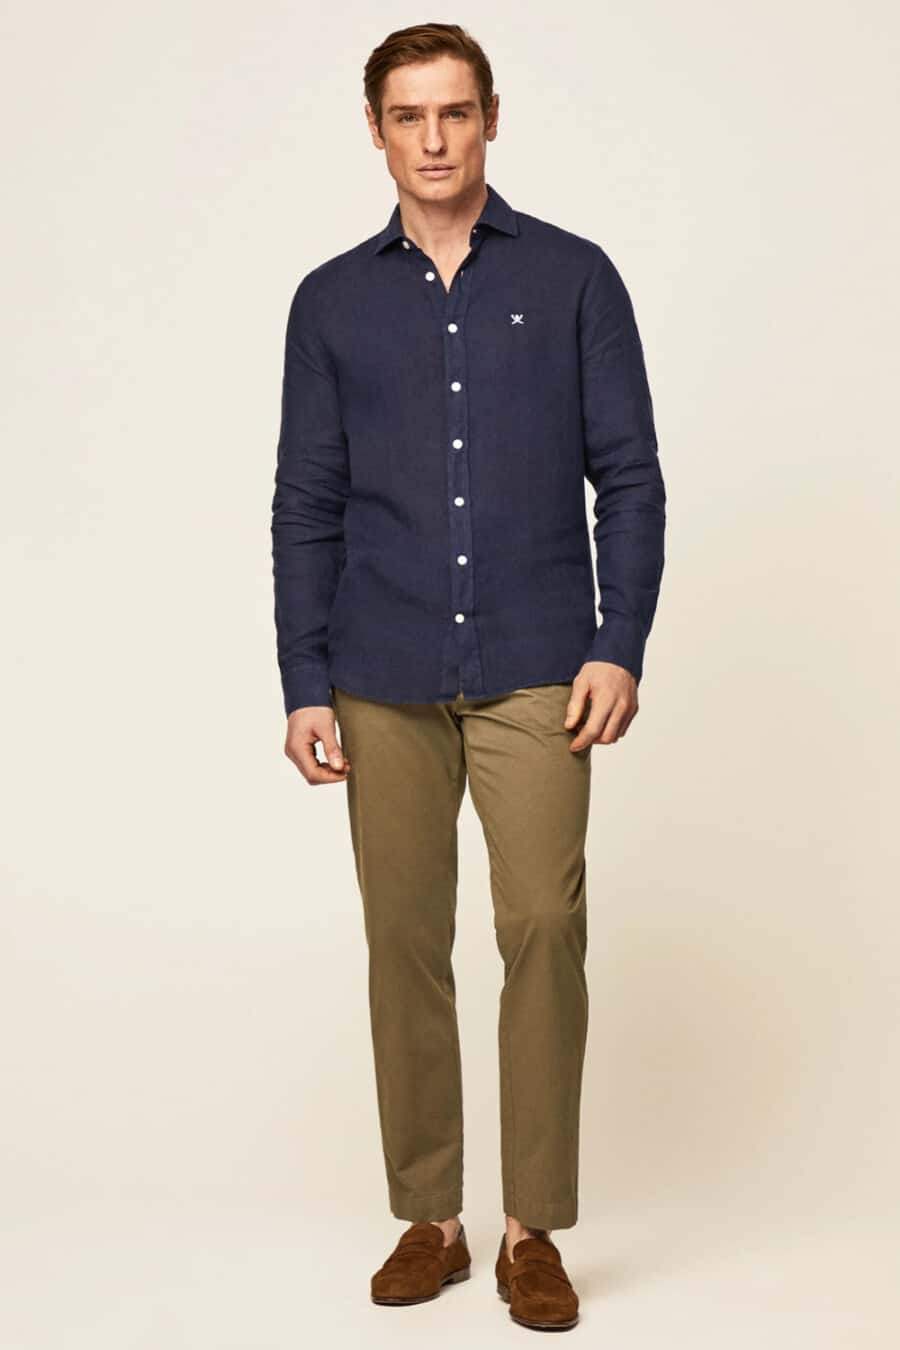 Green Pants with Navy Blue Shirt